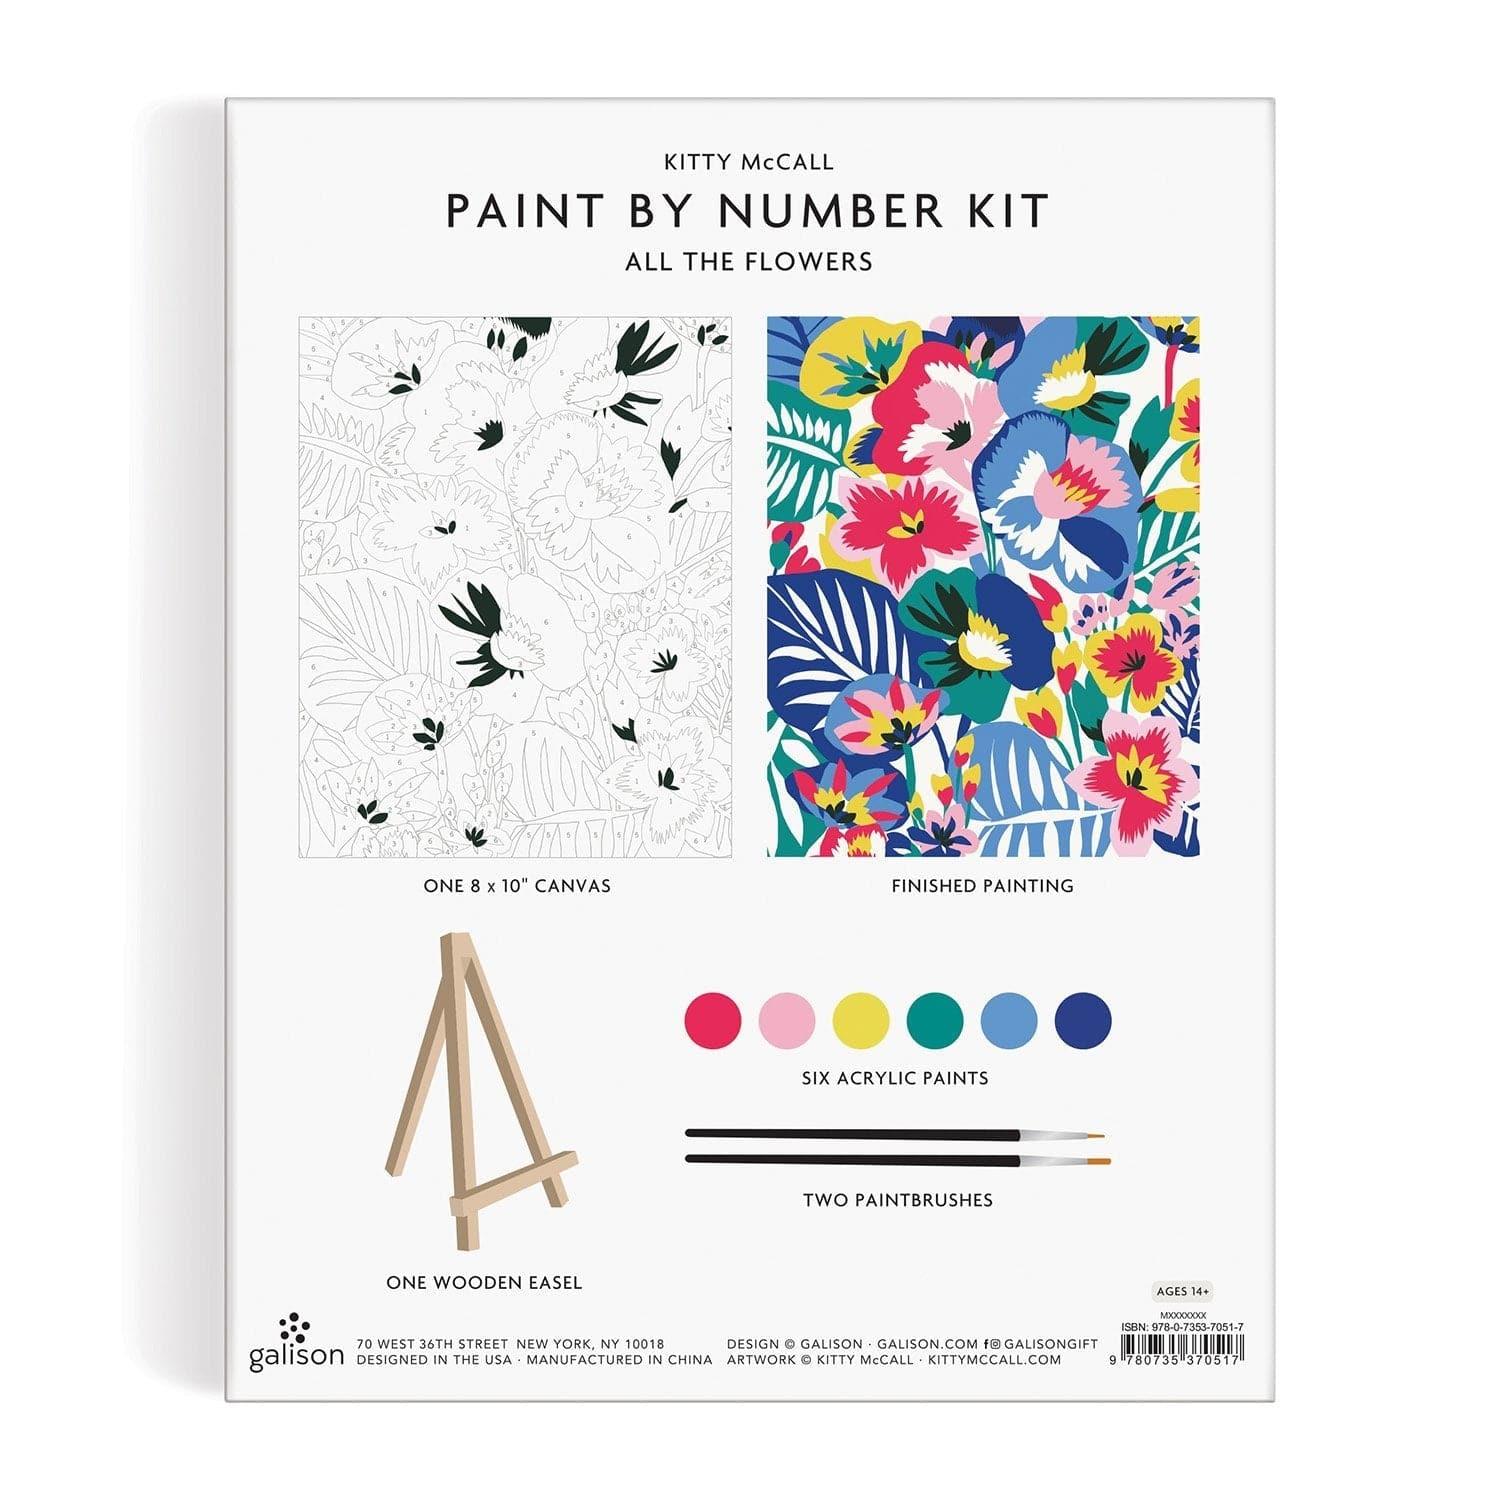 Kitty McCall All the Flowers Paint By Number Kit Kitty McCall All the Flowers Paint By Number Kit 